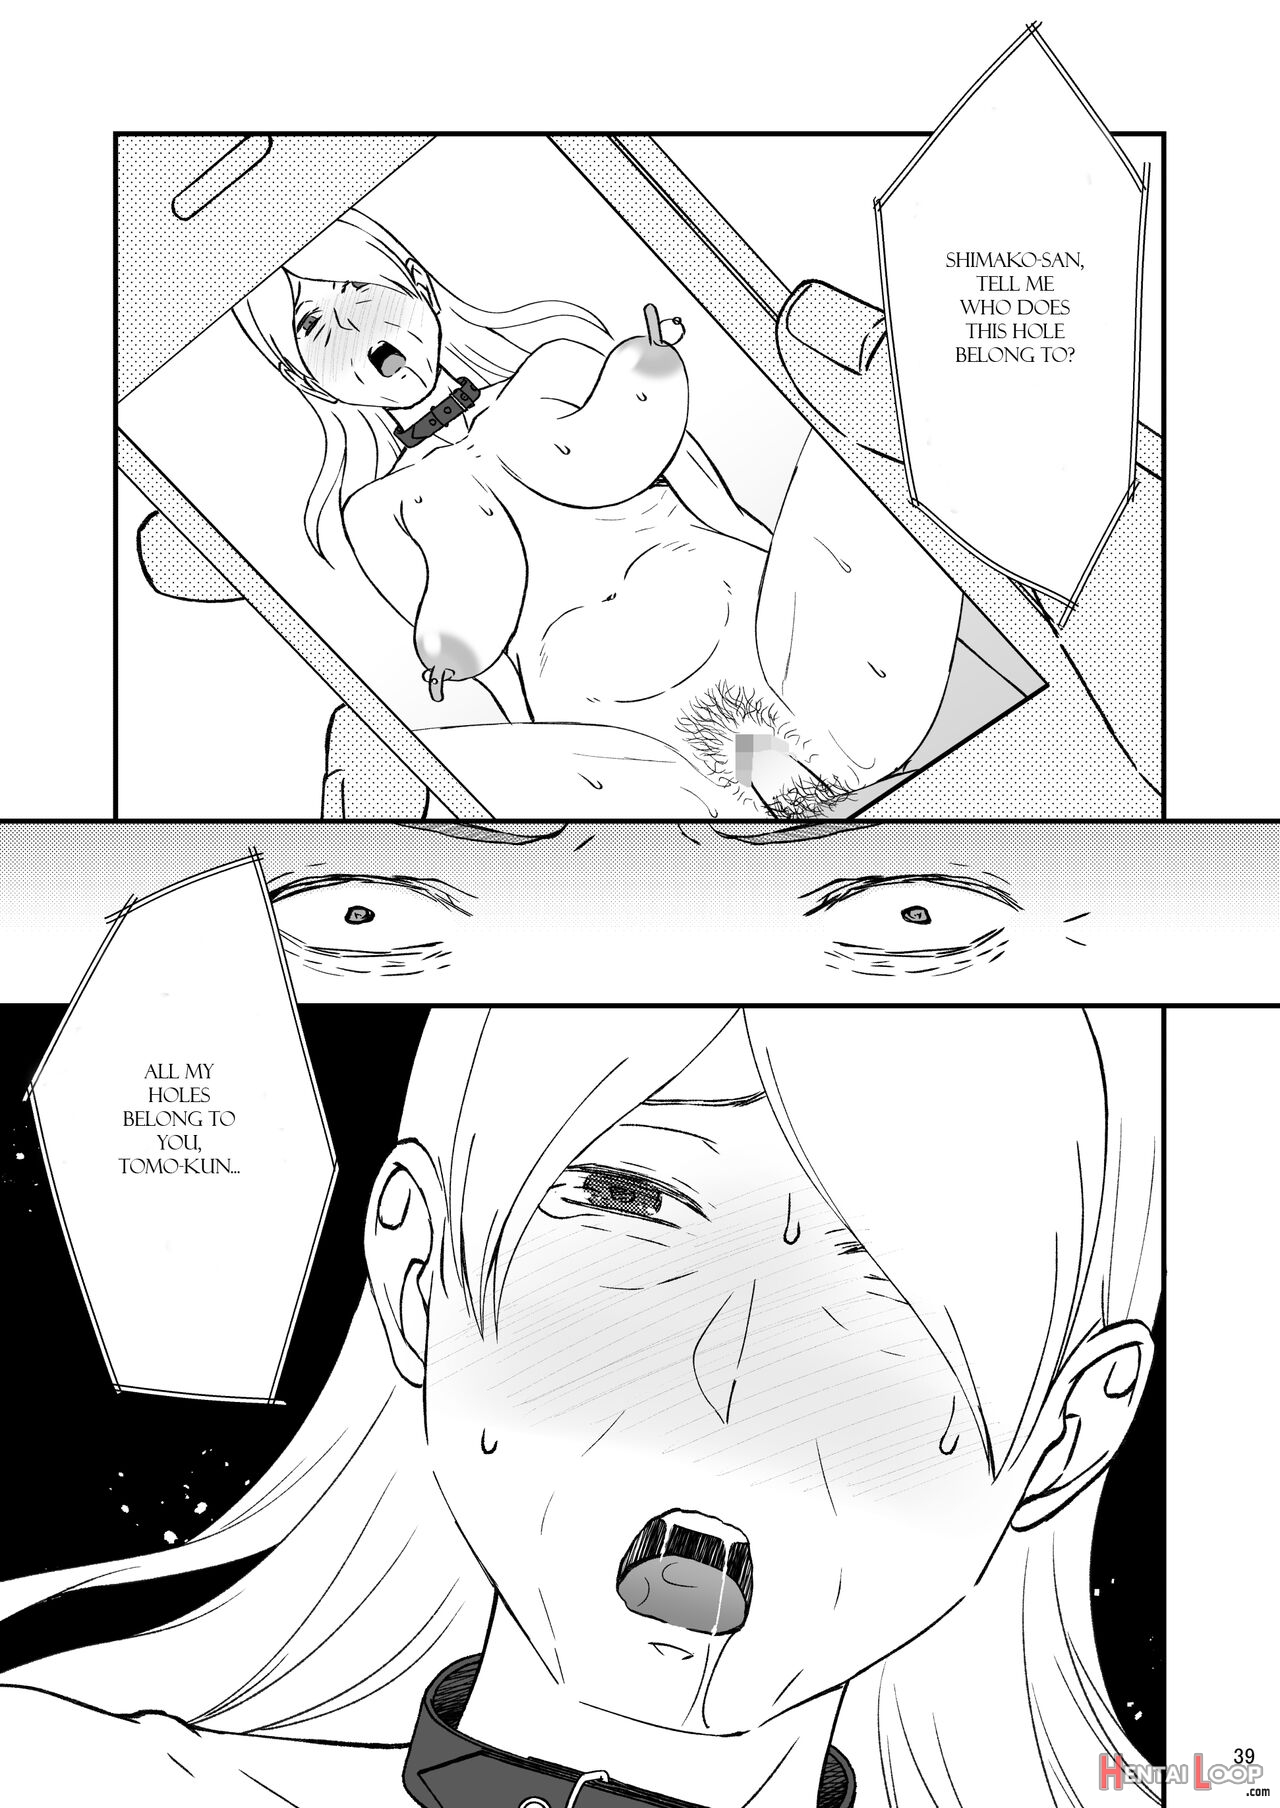 Shimako Mother Of Wife 8 page 39